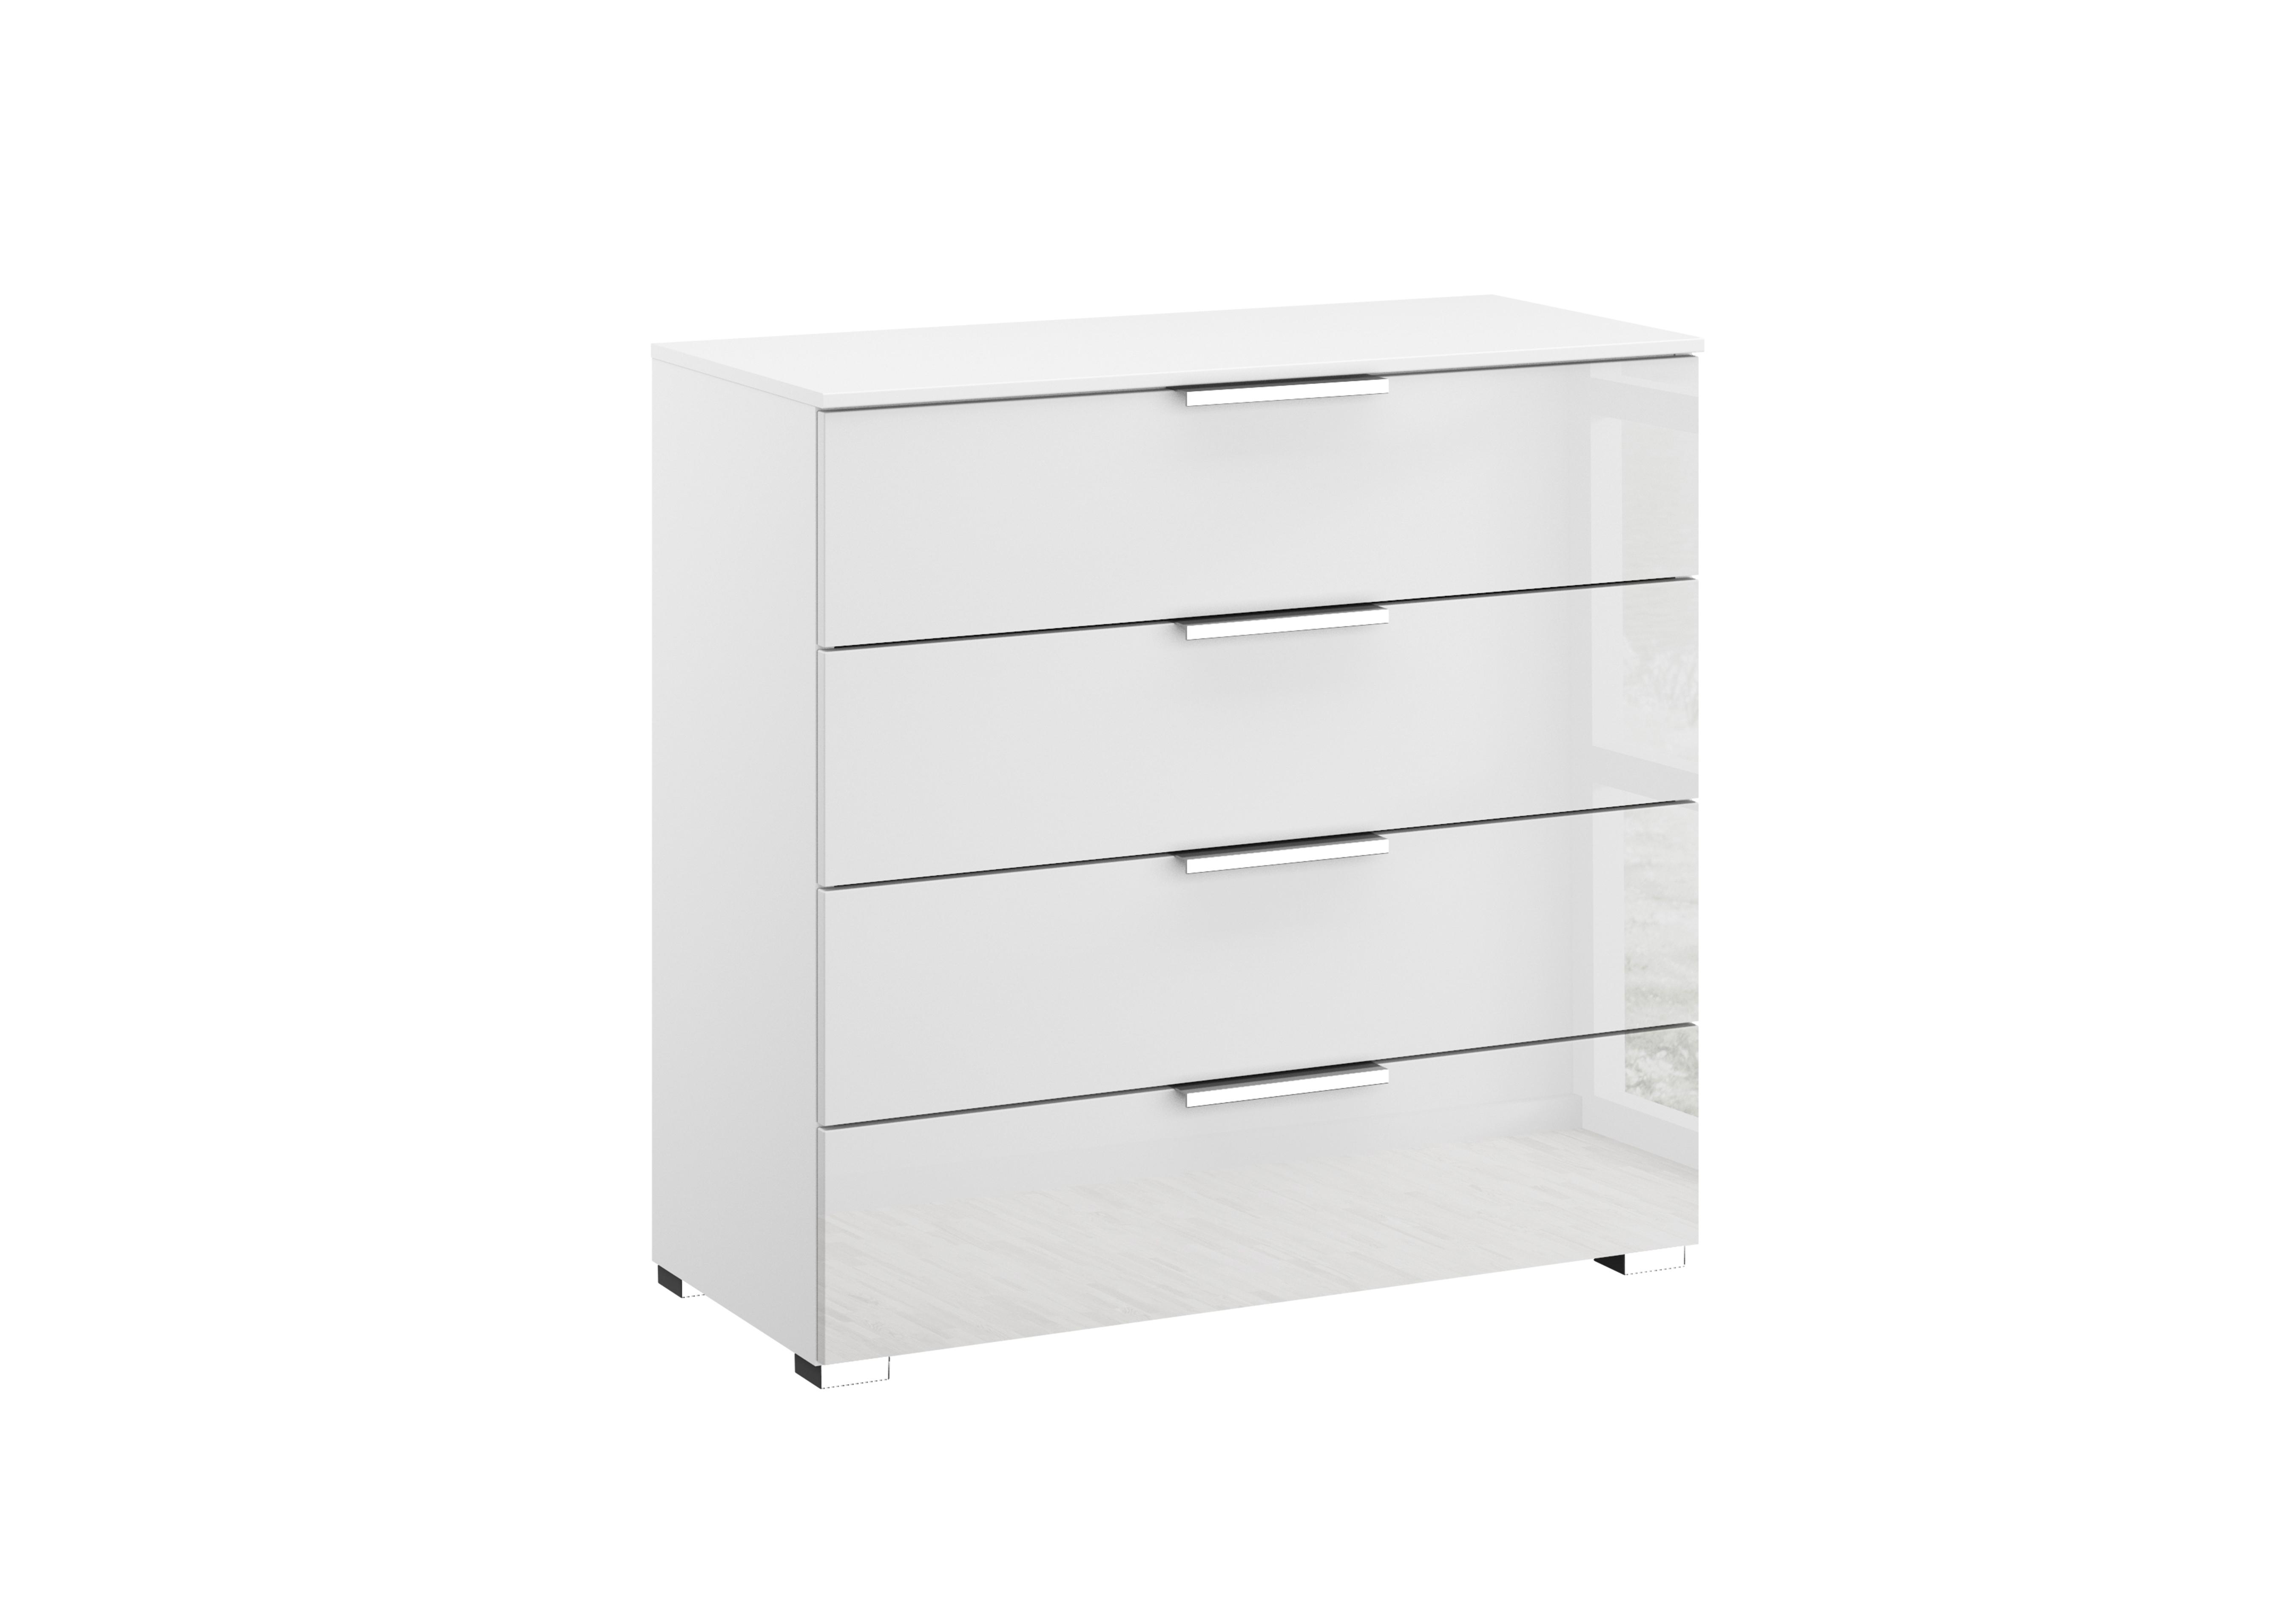 Formes Glass 4 Drawer Wide Chest in A131b White White Front on Furniture Village